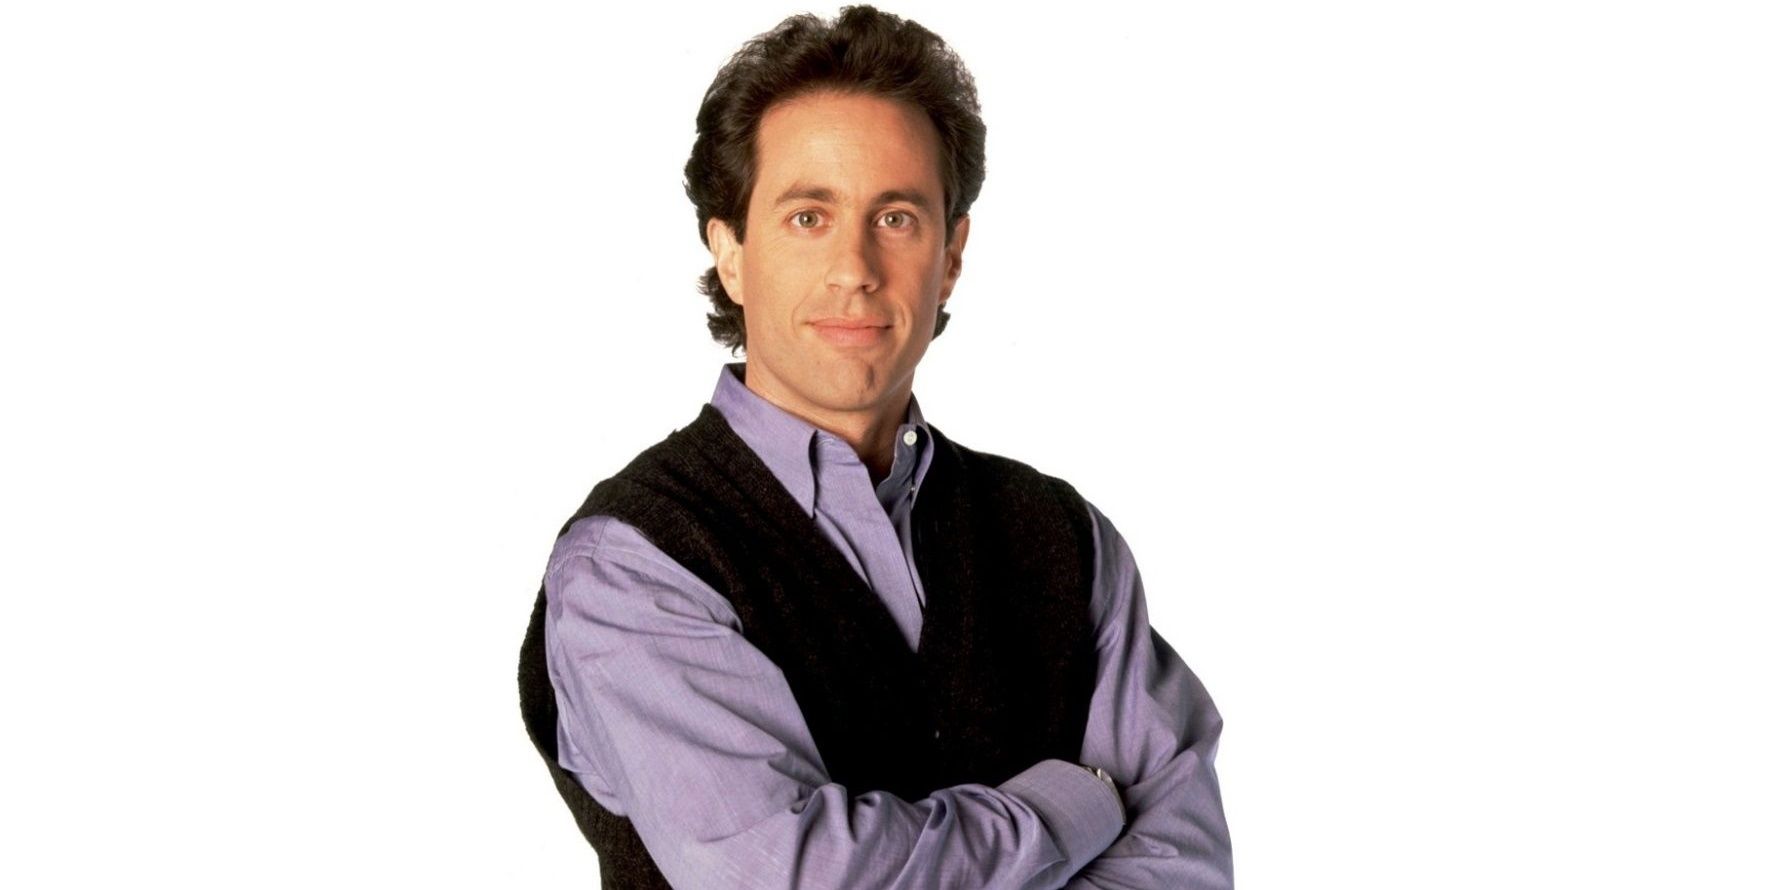 Jerry Seinfeld as the title character of his sitcom